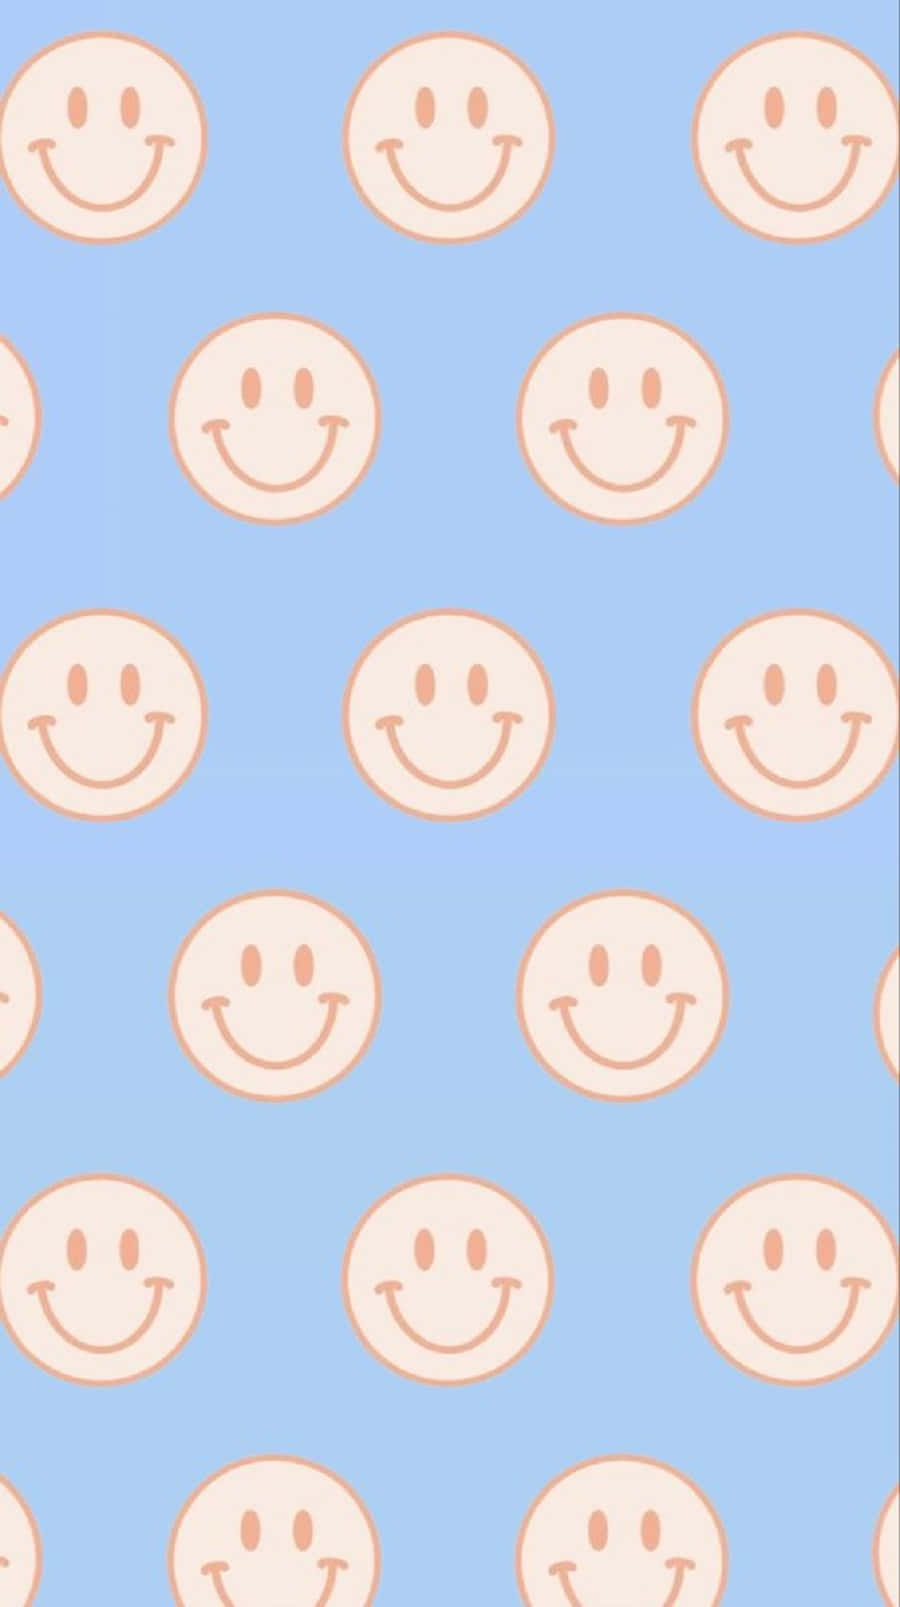 Download A Pattern Of Smiling Faces On A Blue Background